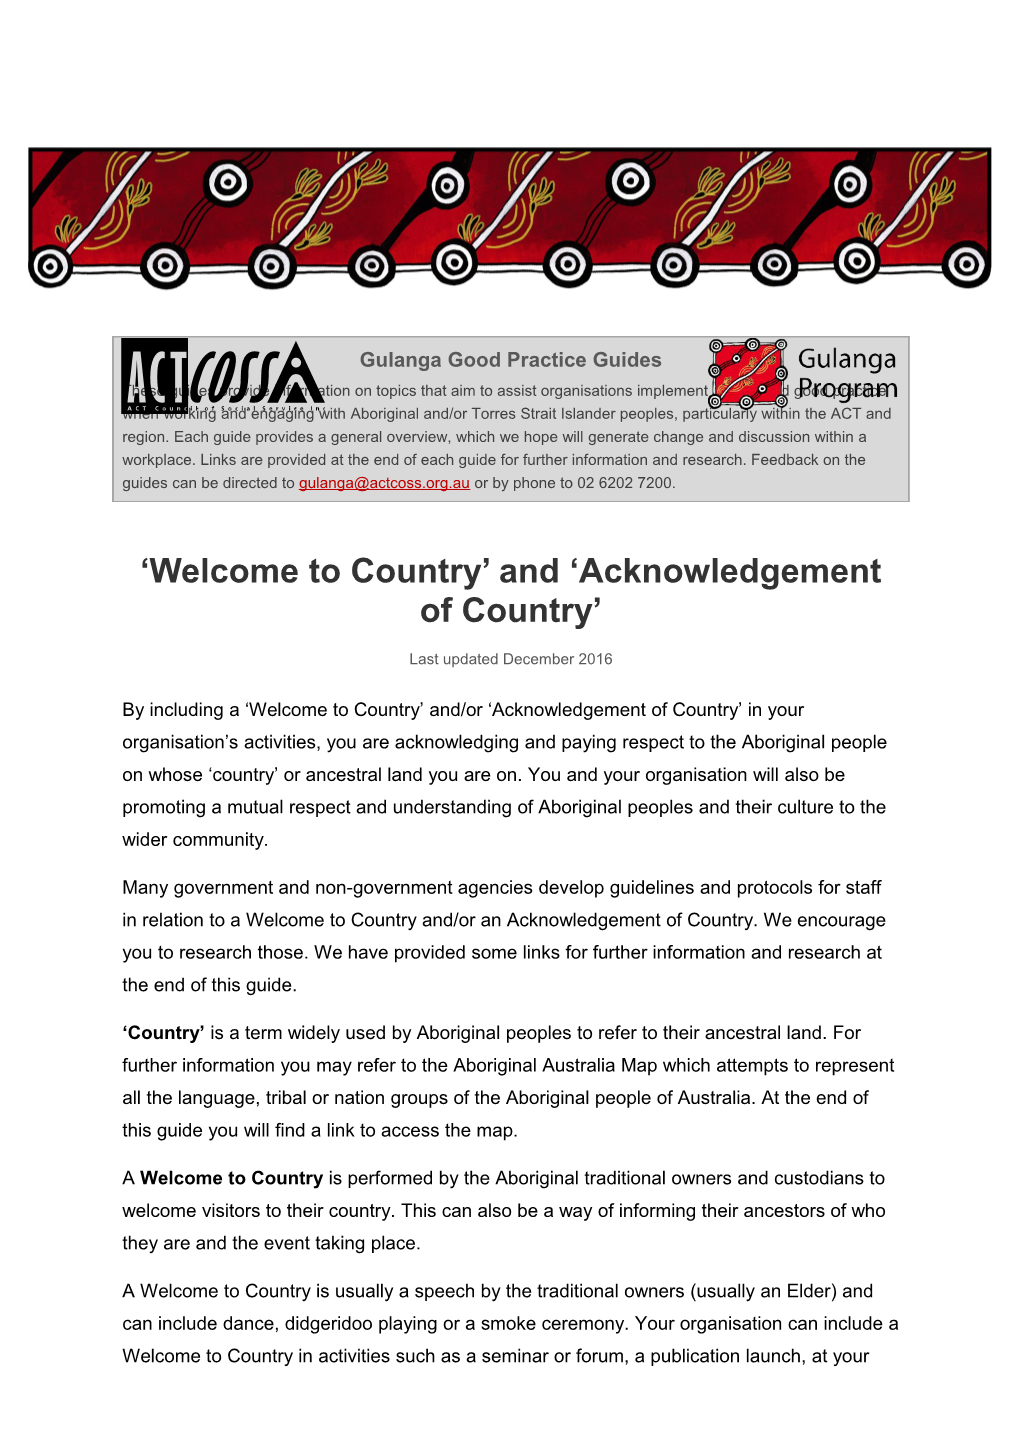 Welcome to Country and Acknowledgement of Country